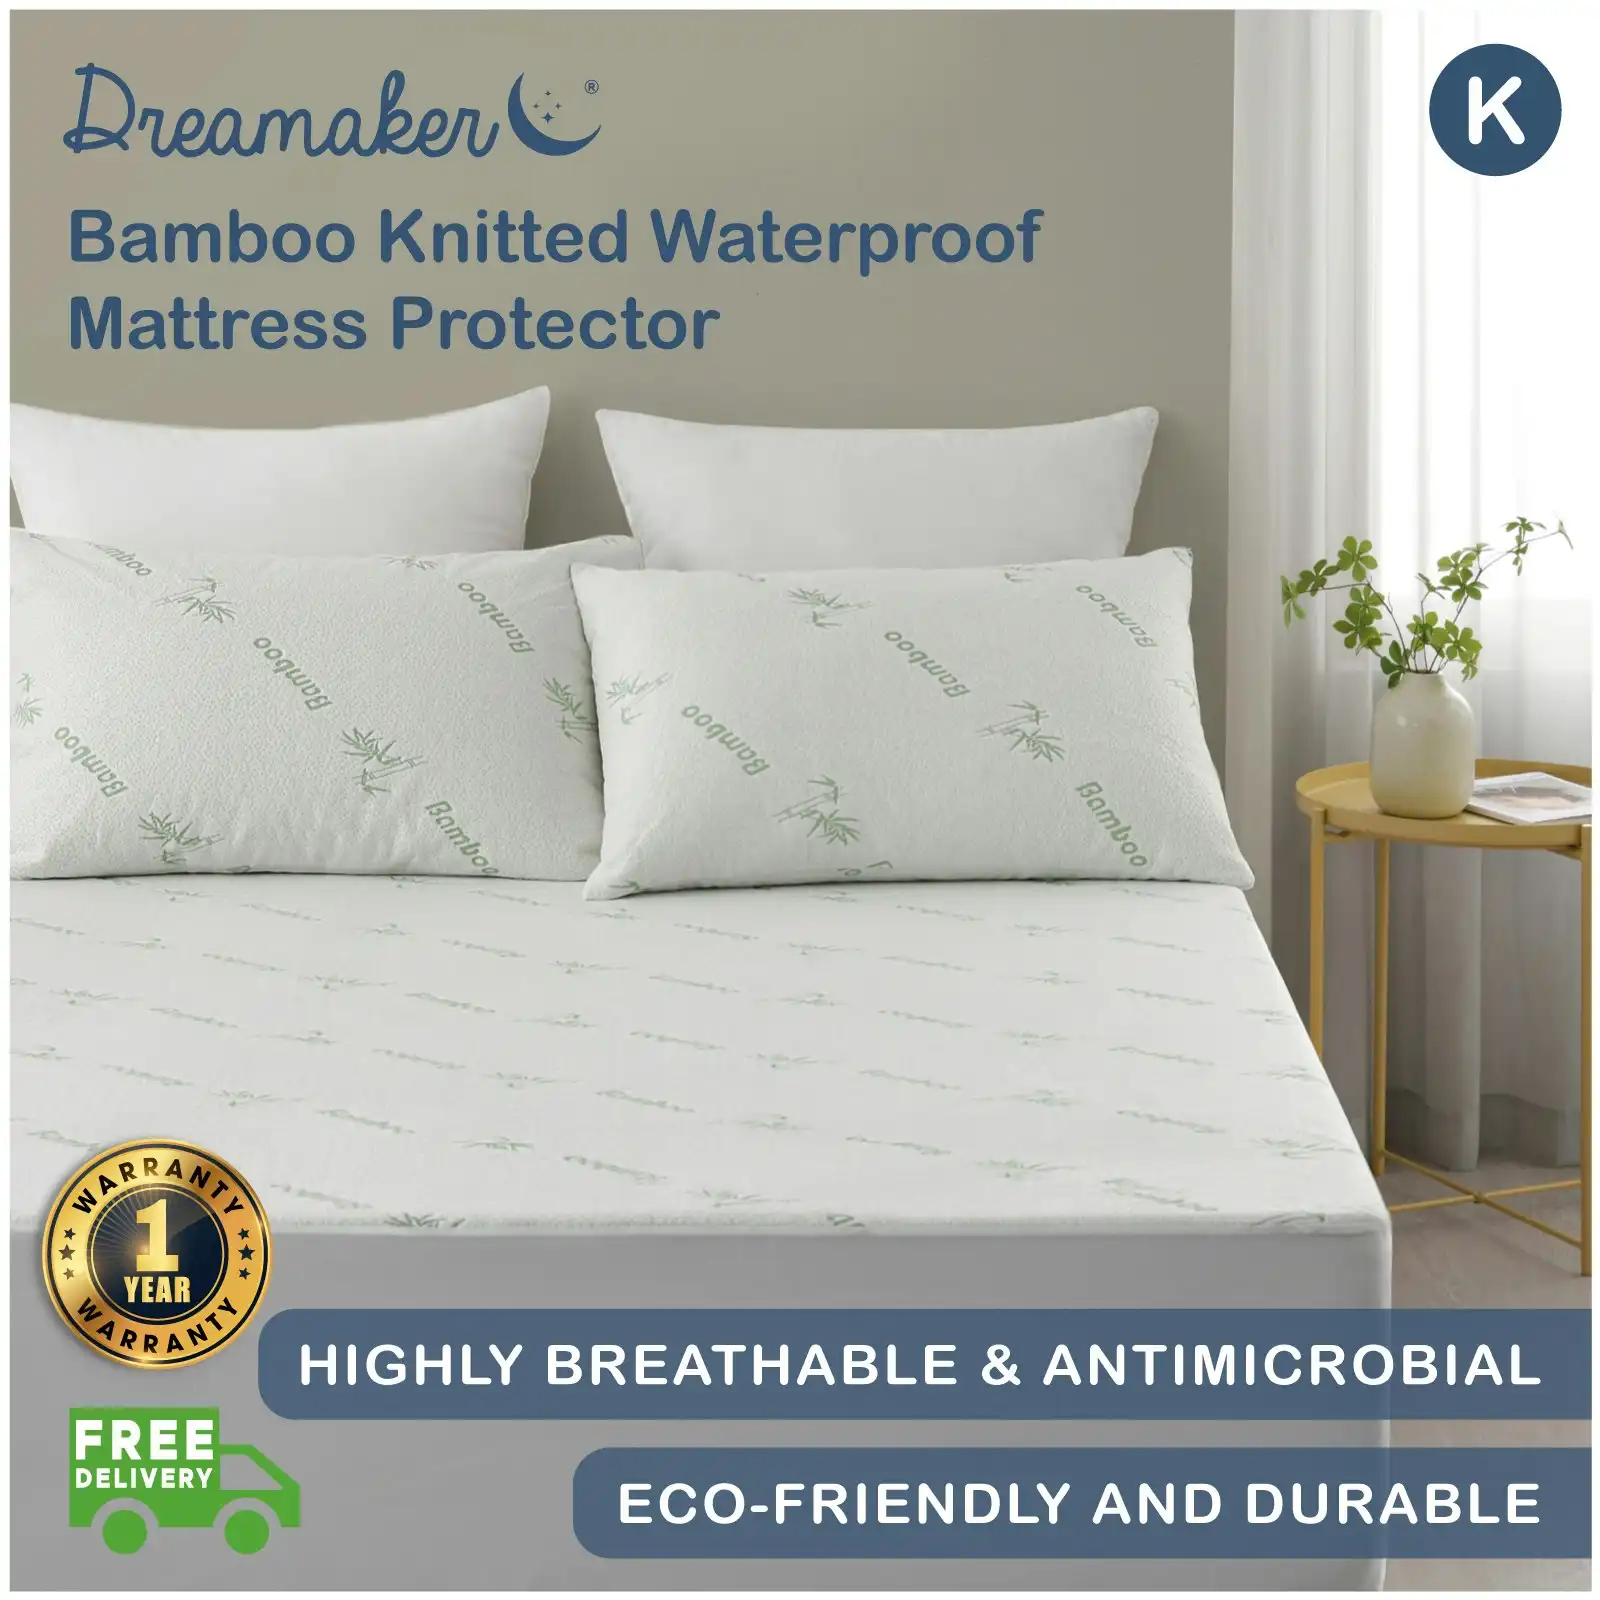 9009445Dreamaker Bamboo Knitted Waterproof Mattress Protector - King Bed